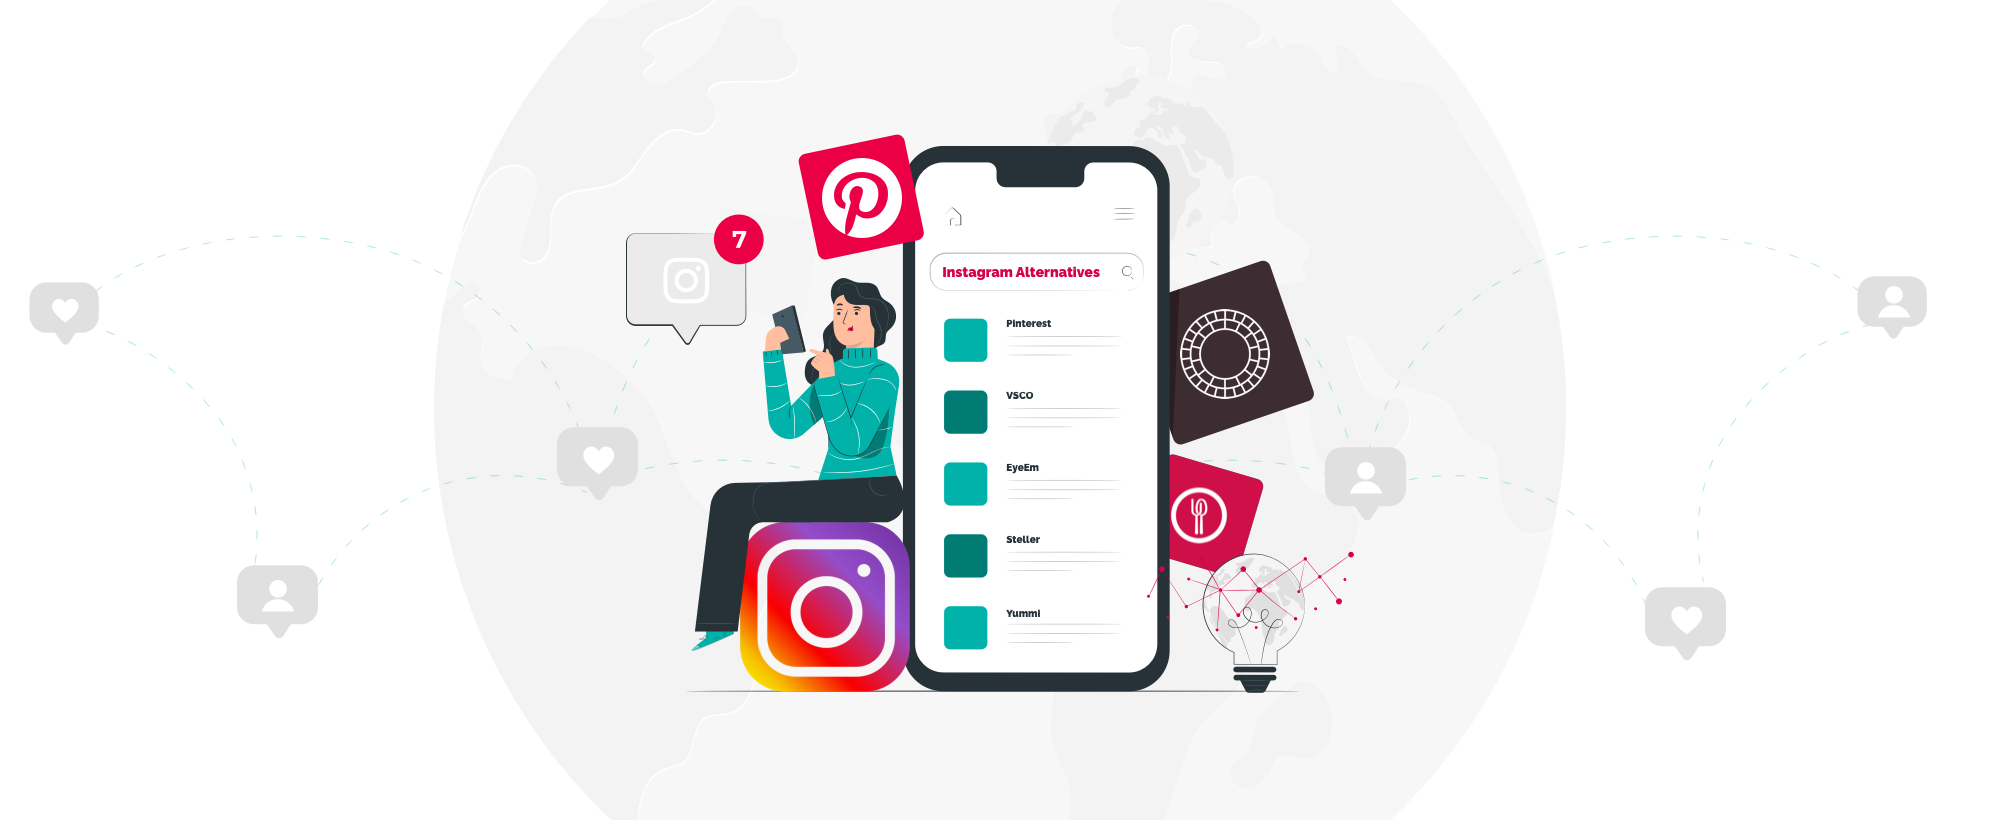 Instagram Alternatives: 5 Instagram-Like Apps and how to choose one?